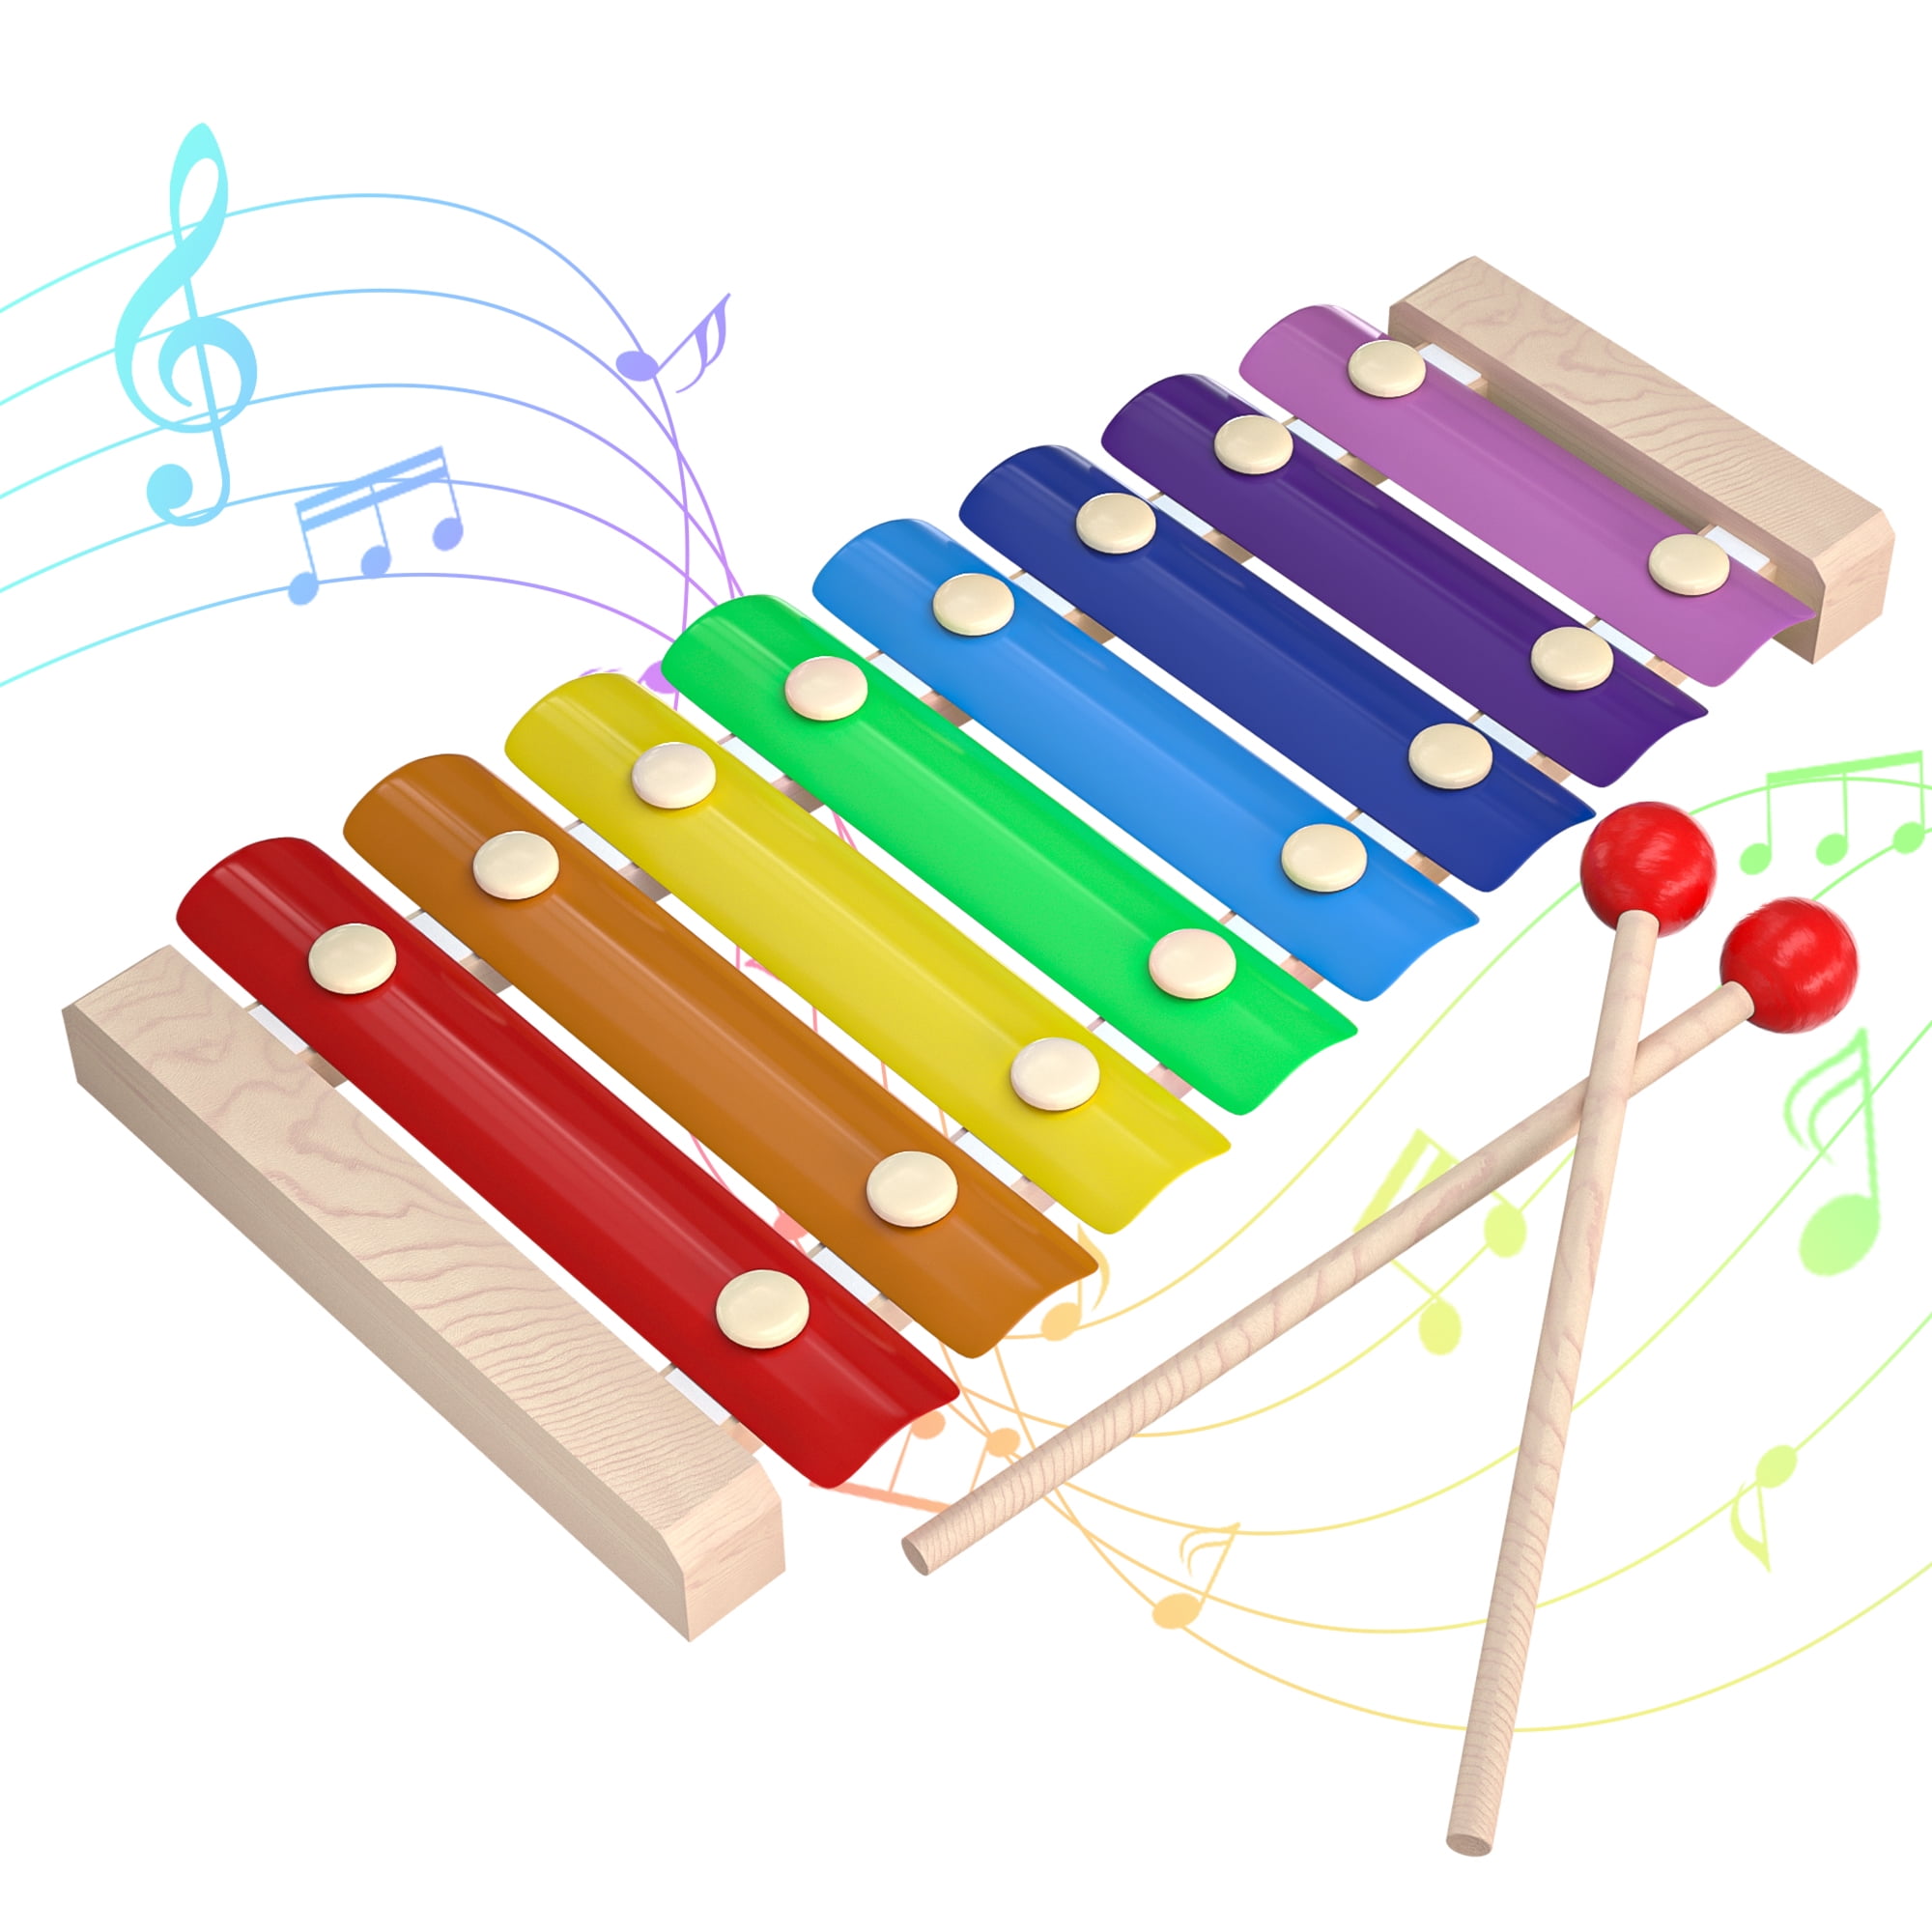 Kids Children's Traditional Metal Xylophone Musical Music Toy Instrument 